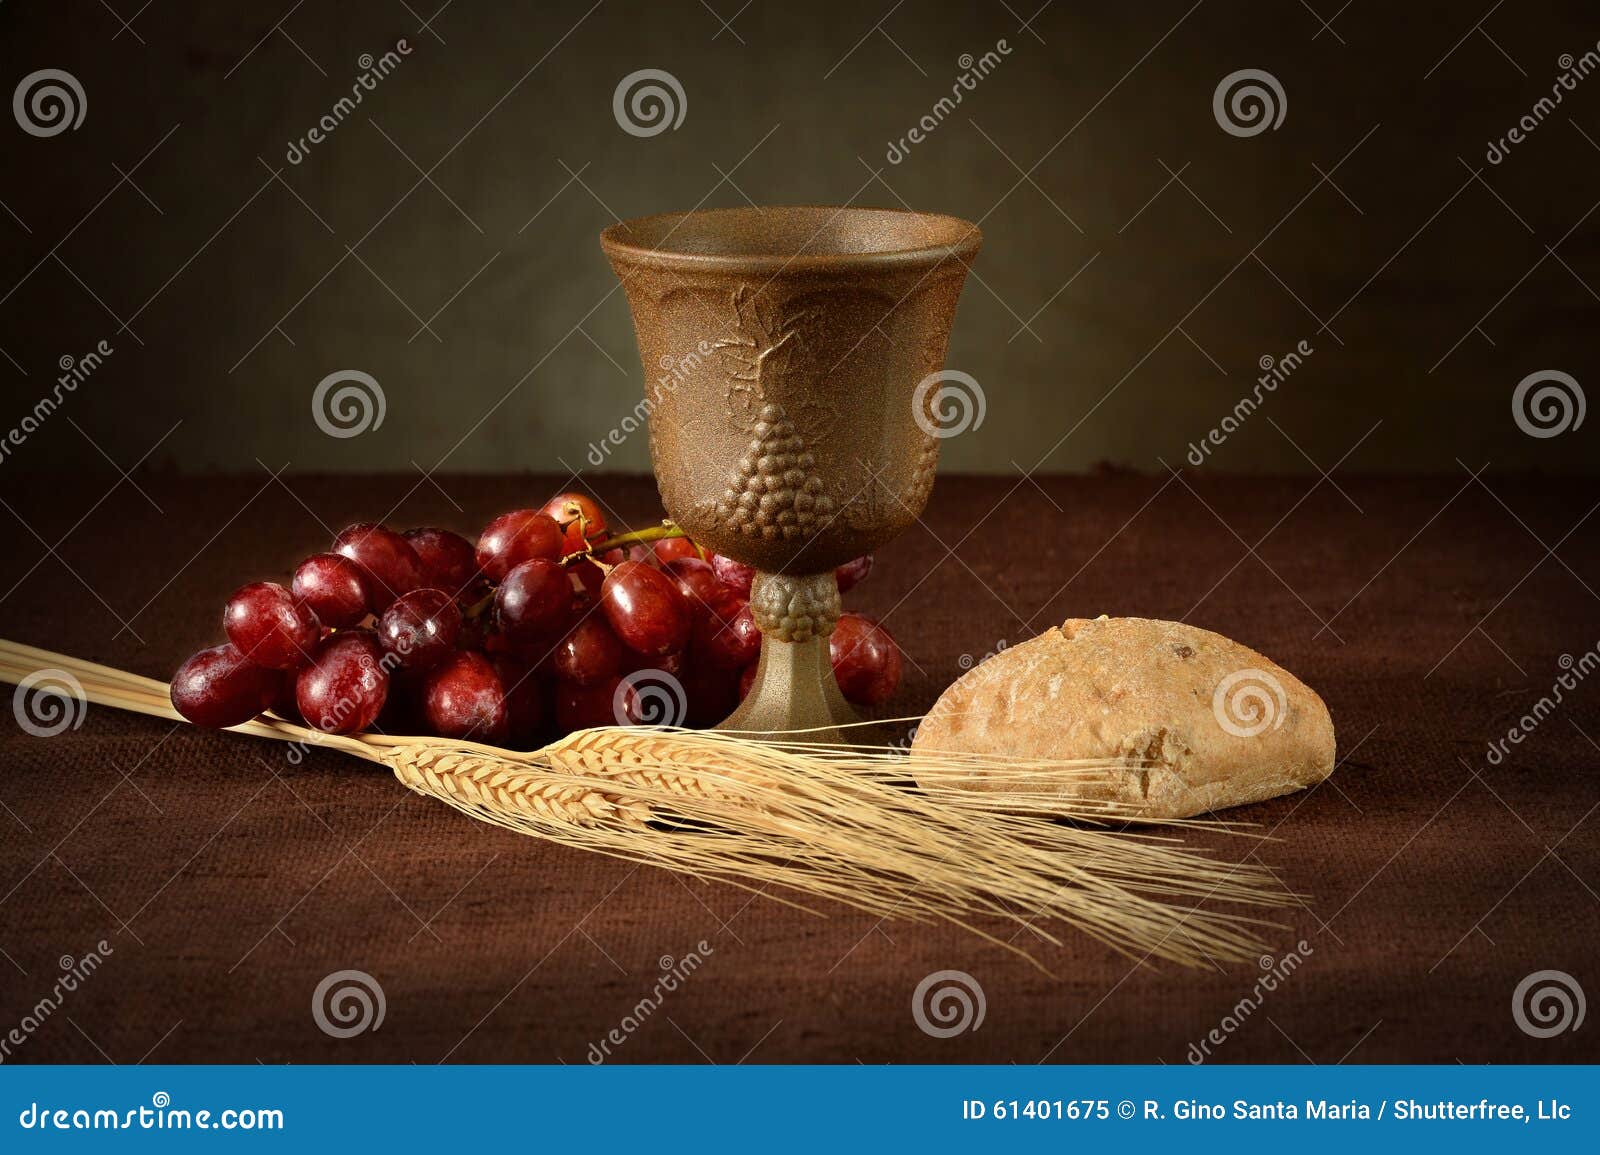 https://thumbs.dreamstime.com/z/communion-table-wine-bread-grapes-wheat-cup-red-as-symbols-61401675.jpg